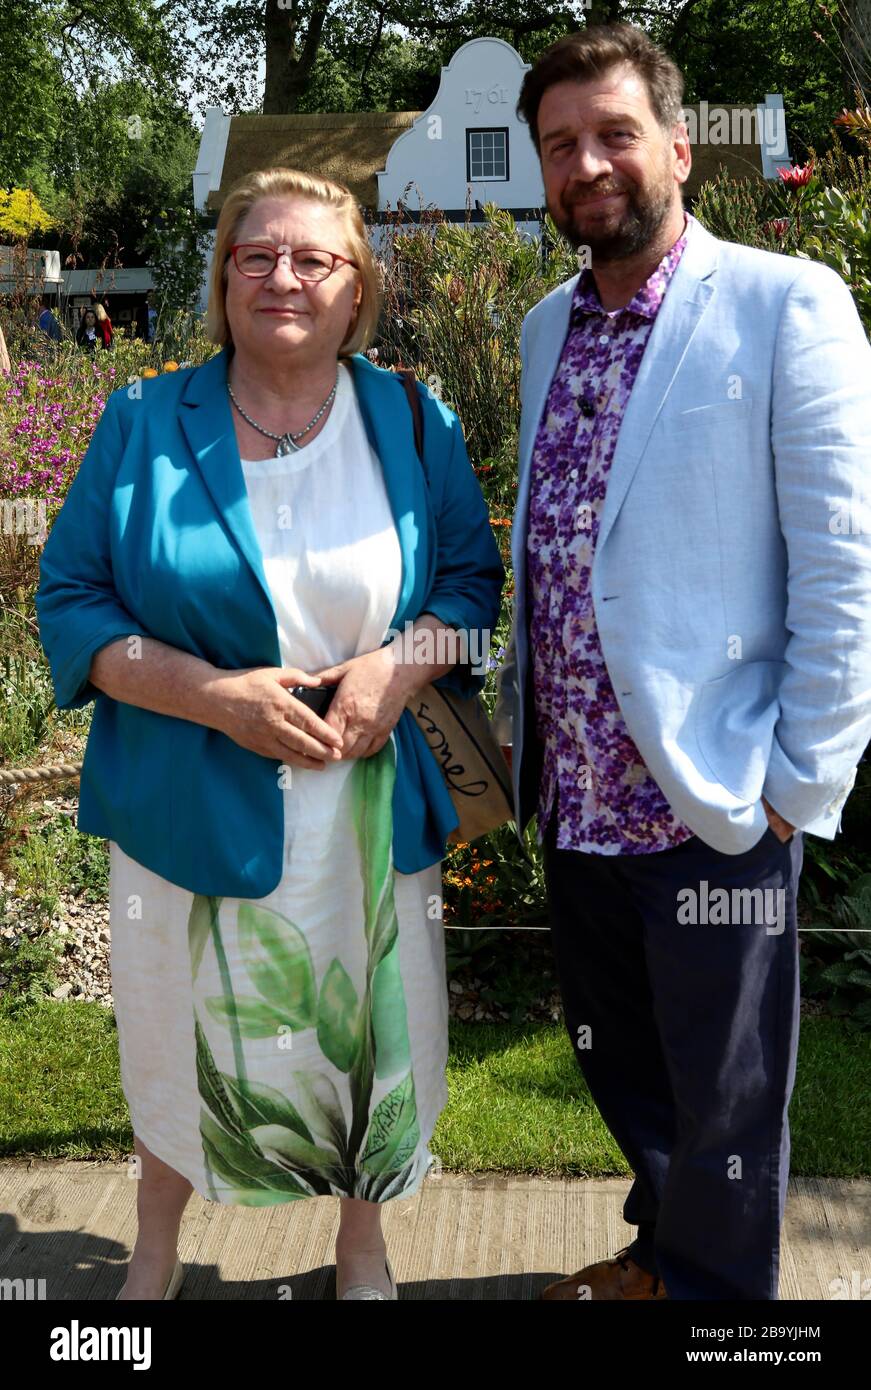 May 21, 2018 - London, England, UK - RHS Chelsea Flower Show Press Day Photo Shows: Rosemary Shrager and Nick Knowles Stock Photo